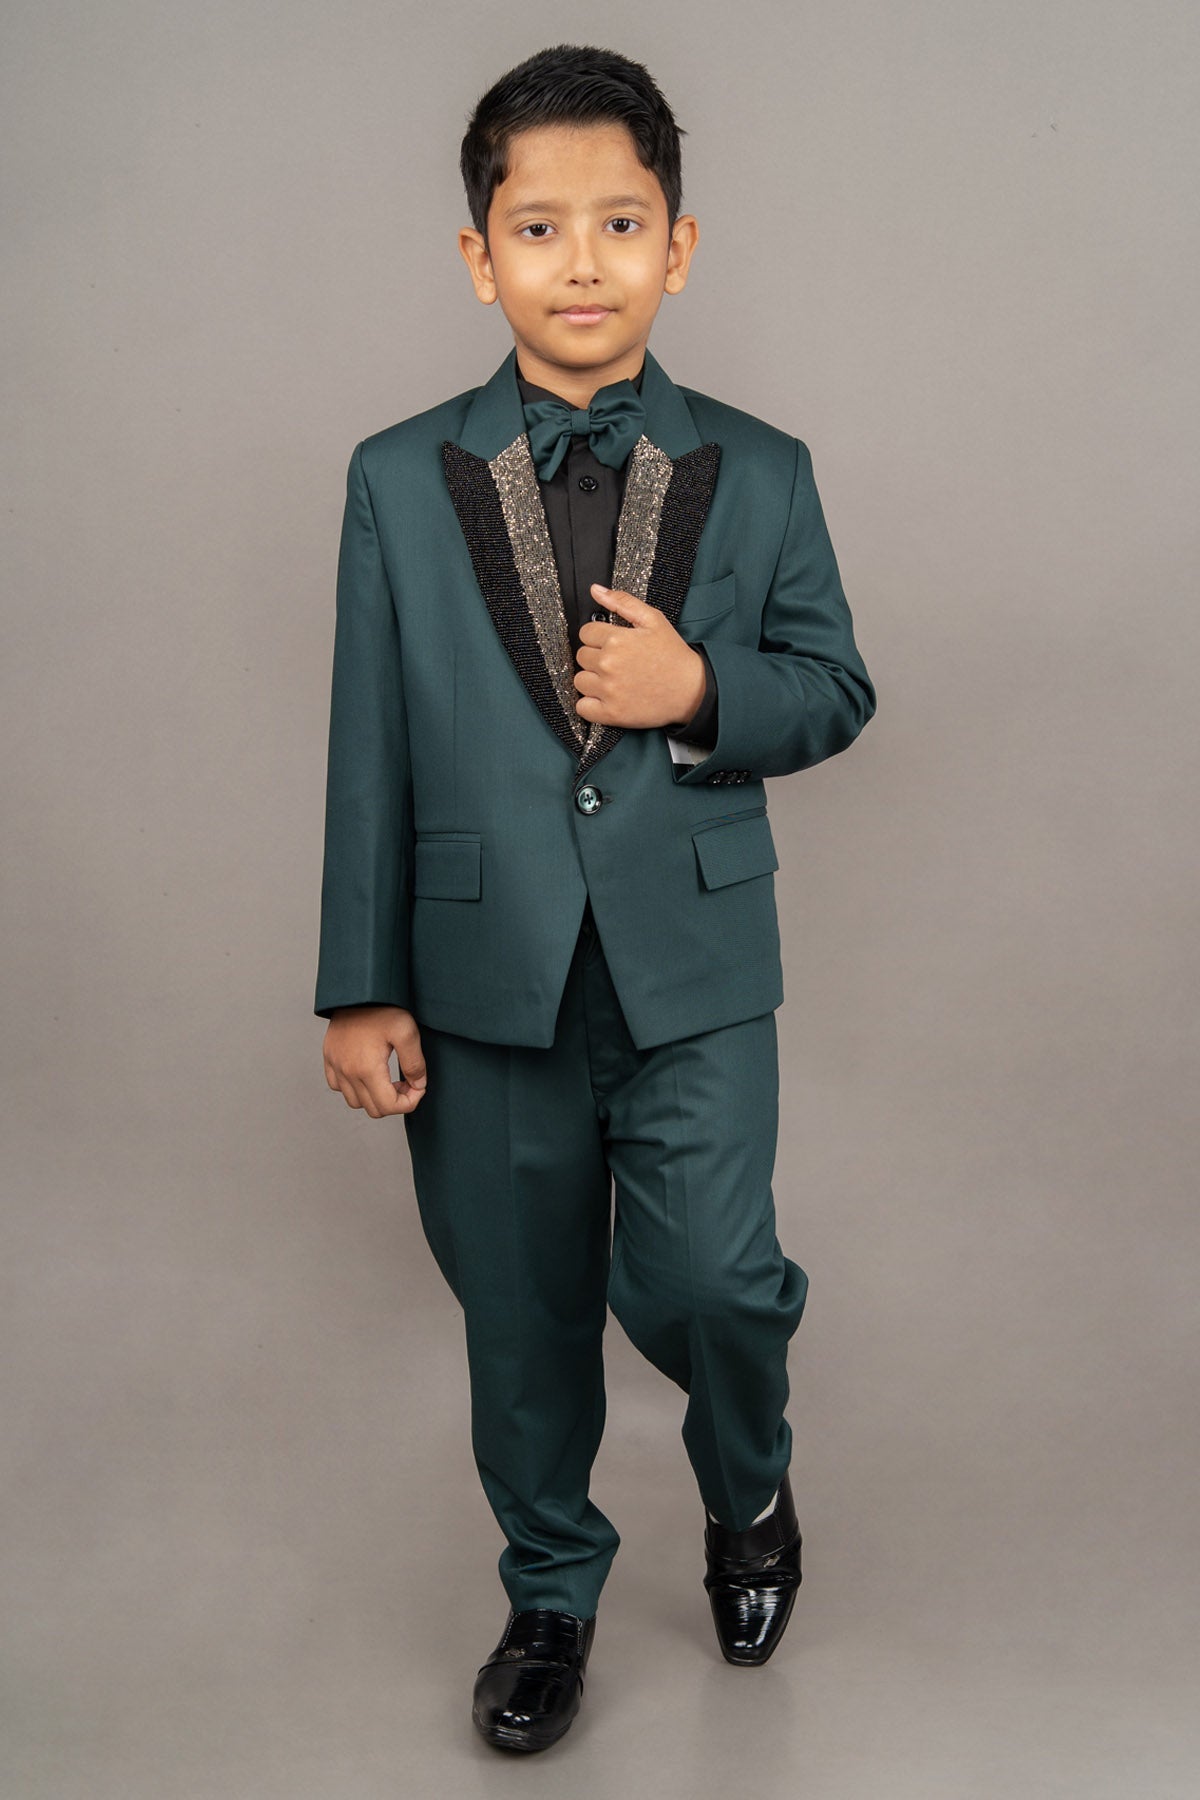 Designer Little Brats Green Lapel Embroidered Suit For young Boys Available online at ScrollnShops